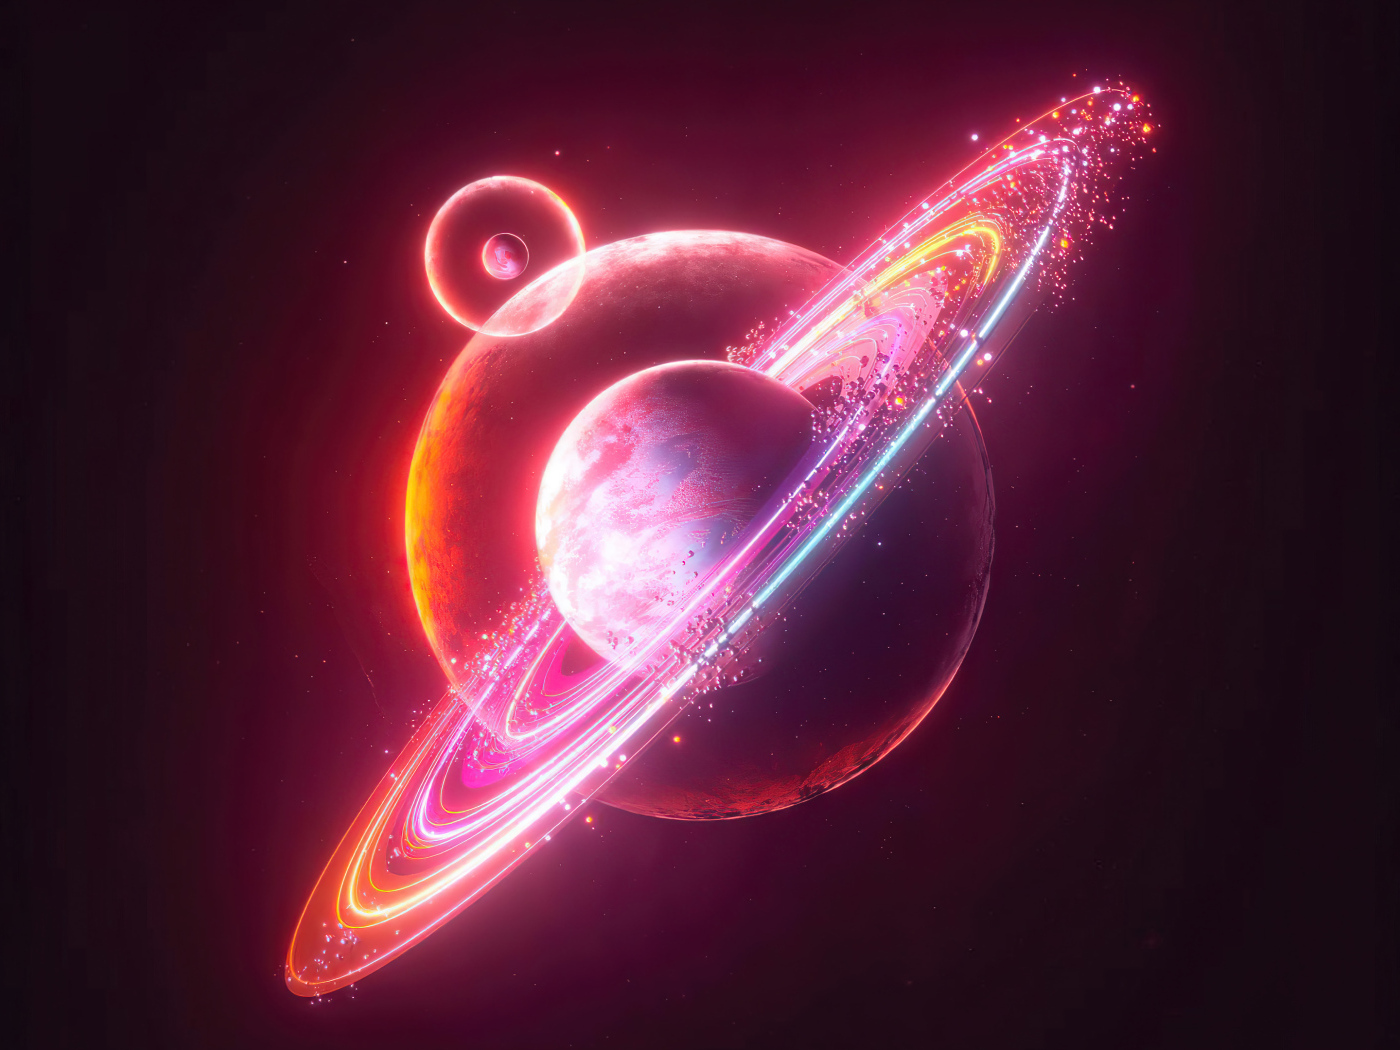 Circles around a pink planet in space